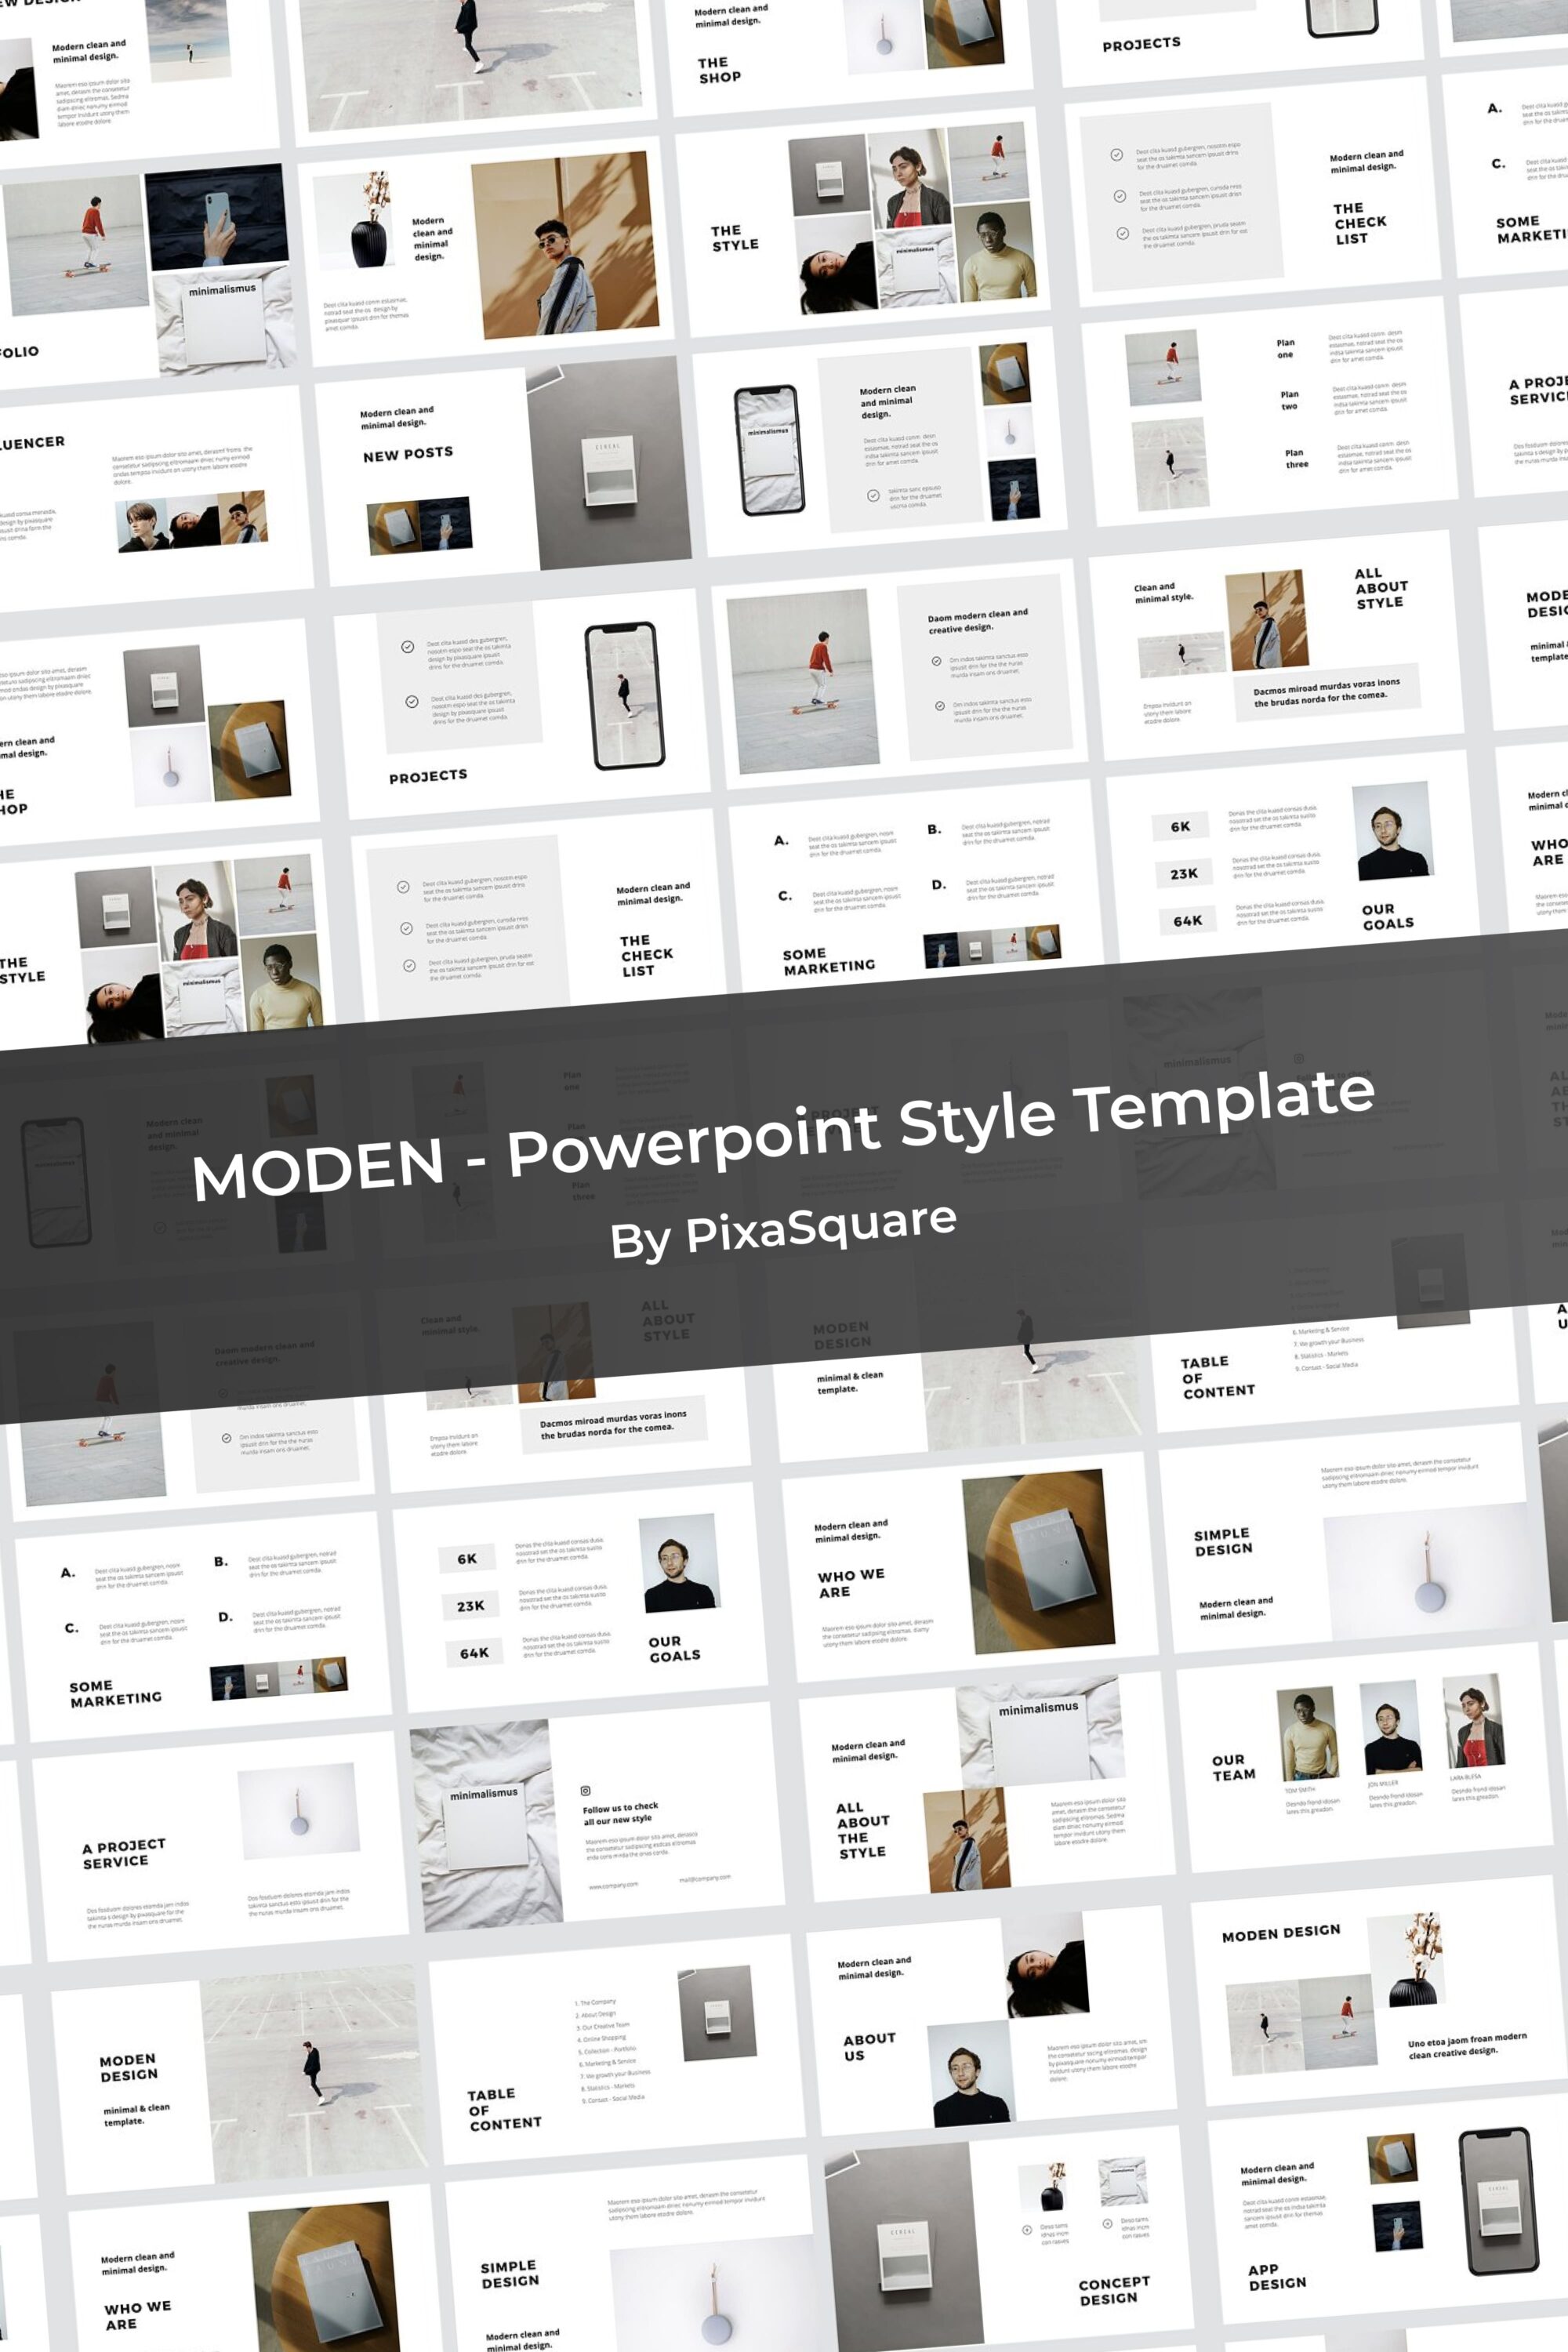 moden powerpoint style template 03